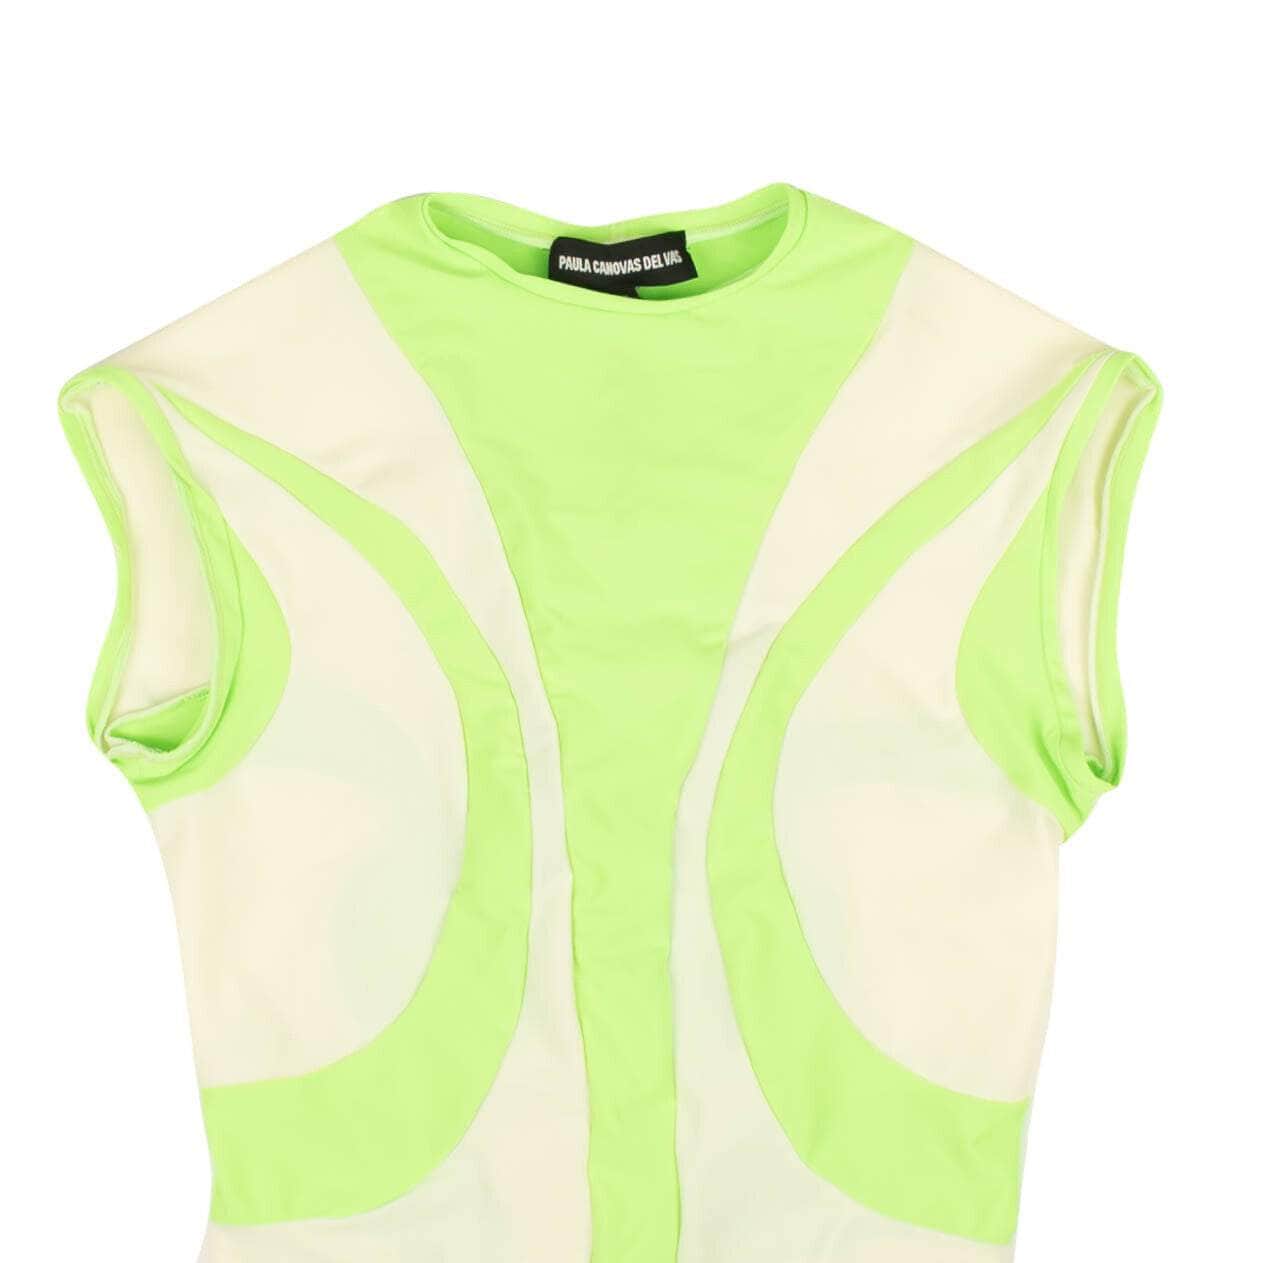 PAULA CANOVAS DEL VAS 250-500, channelenable-all, chicmi, couponcollection, gender-womens, main-clothing, MixedApparel, paula-canovas-del-vas, size-s, womens-blouses S Green Lycra Sleeveless Top 95-PCV-1004/S 95-PCV-1004/S